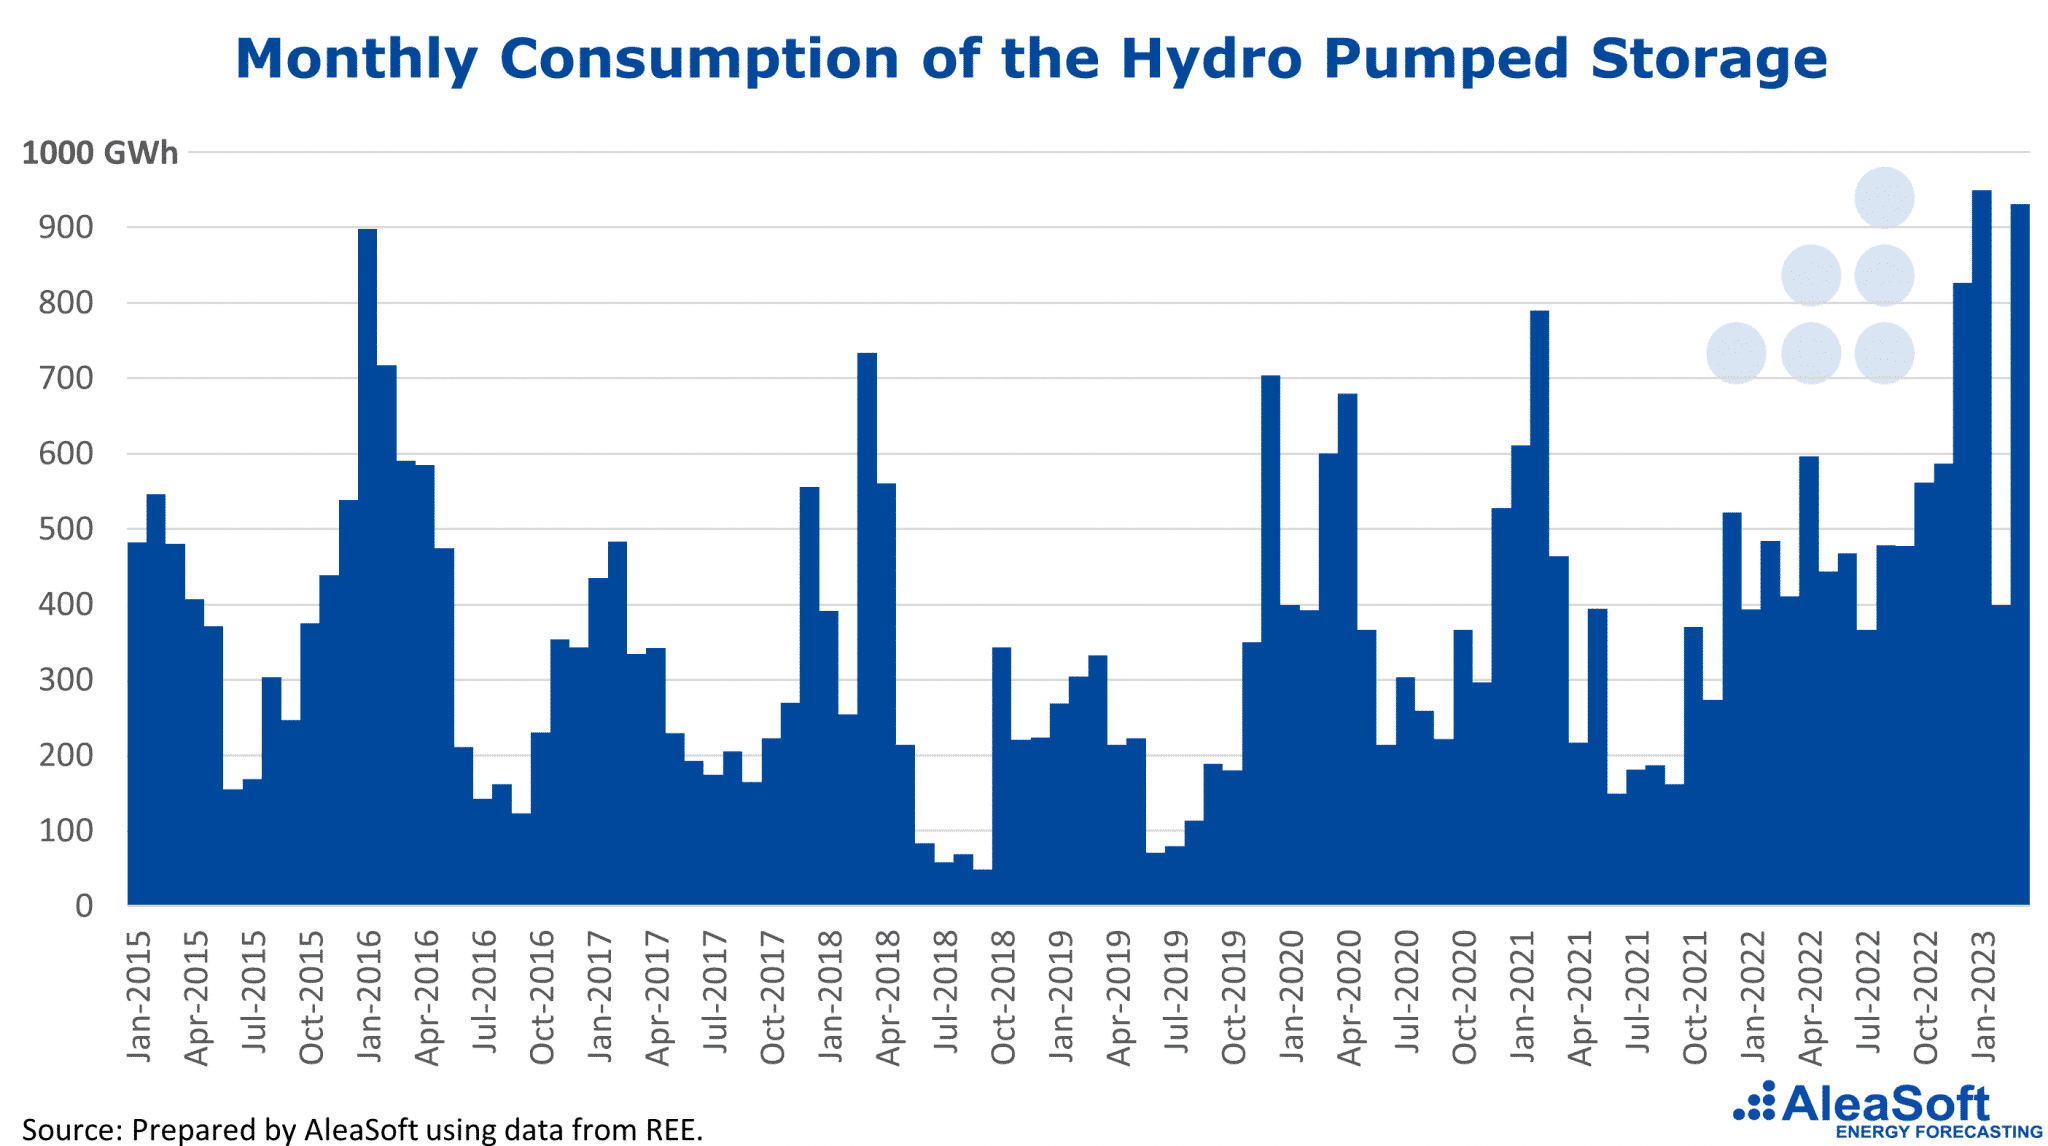 AleaSoft - Monthly Consumption Hydro Pumped